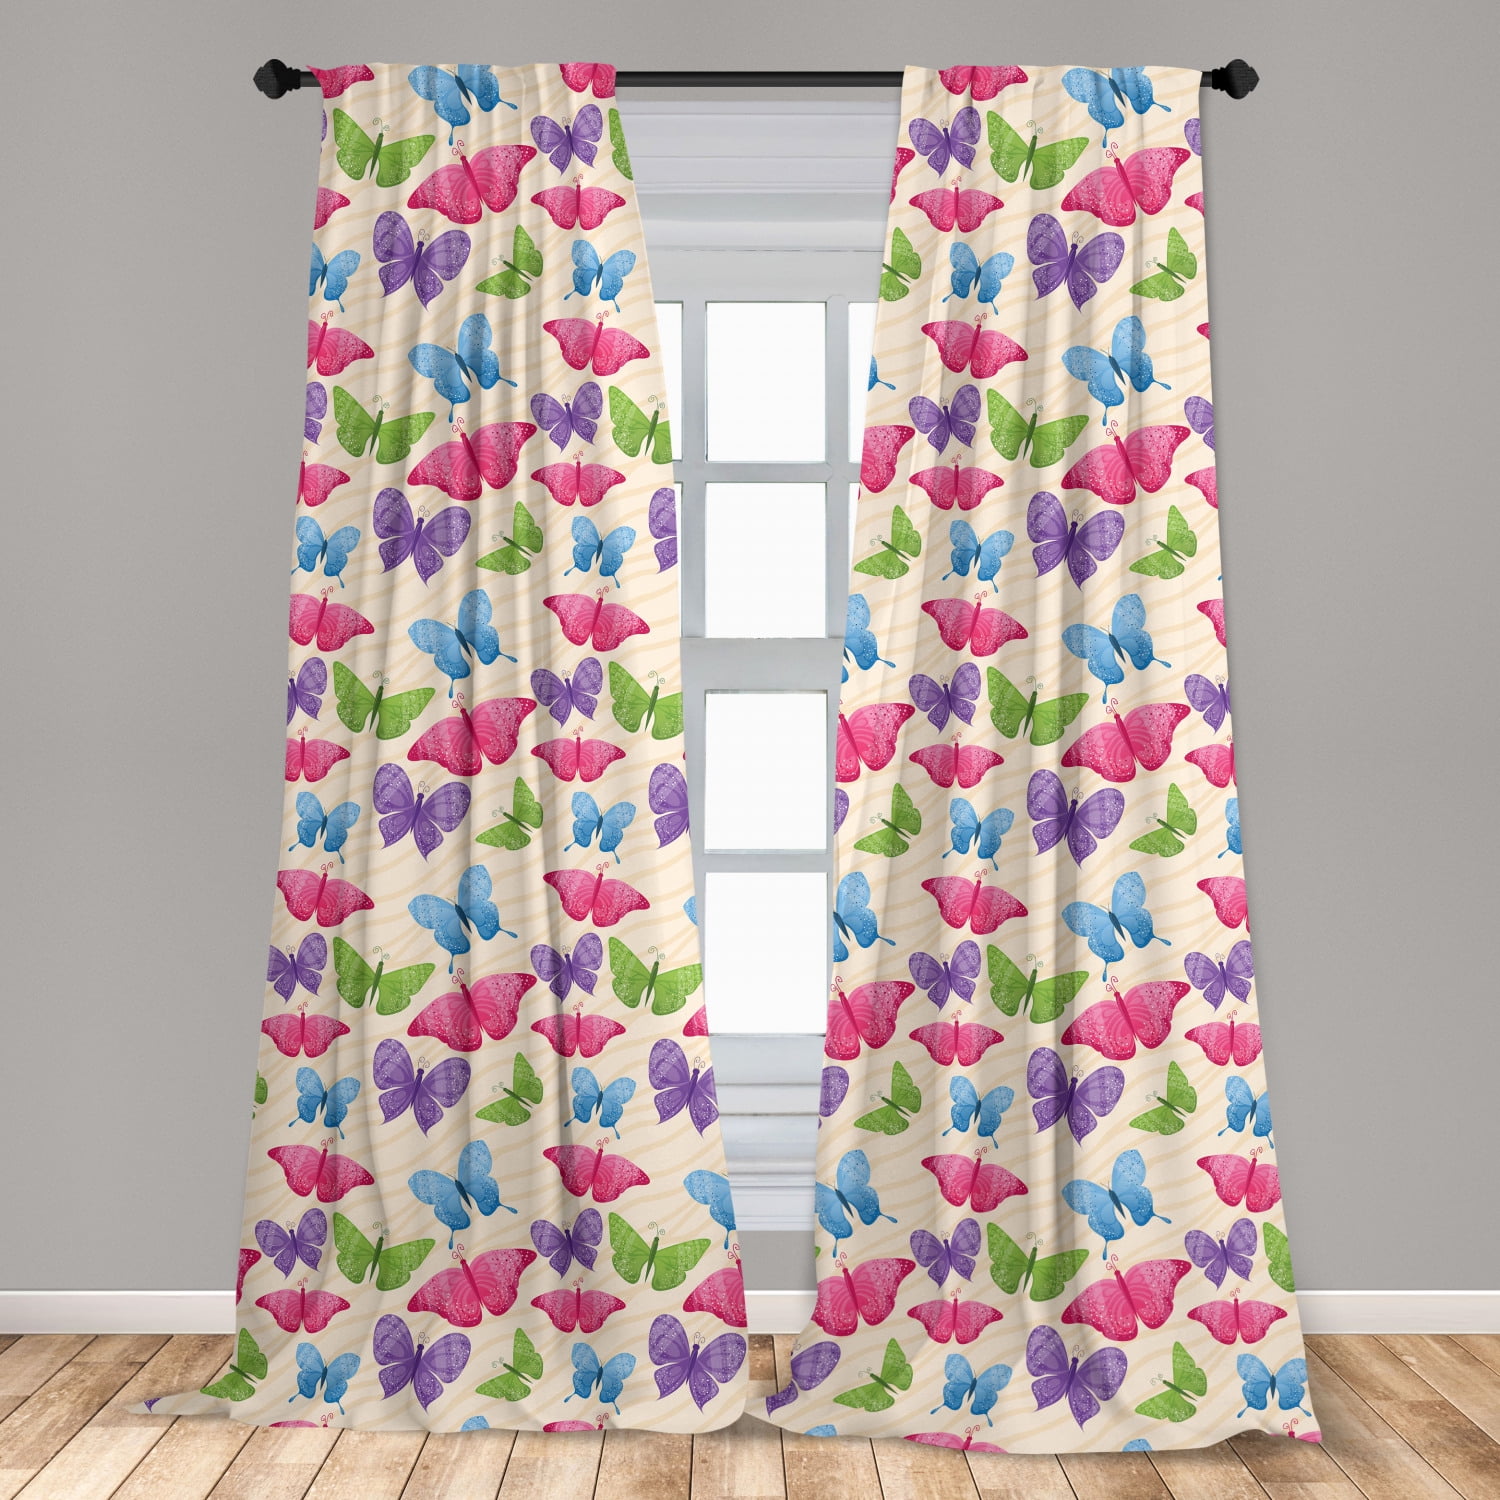 Hippie Pink Butterfly Window Curtain For Living Room Bedroom Curtain 2 Panels 